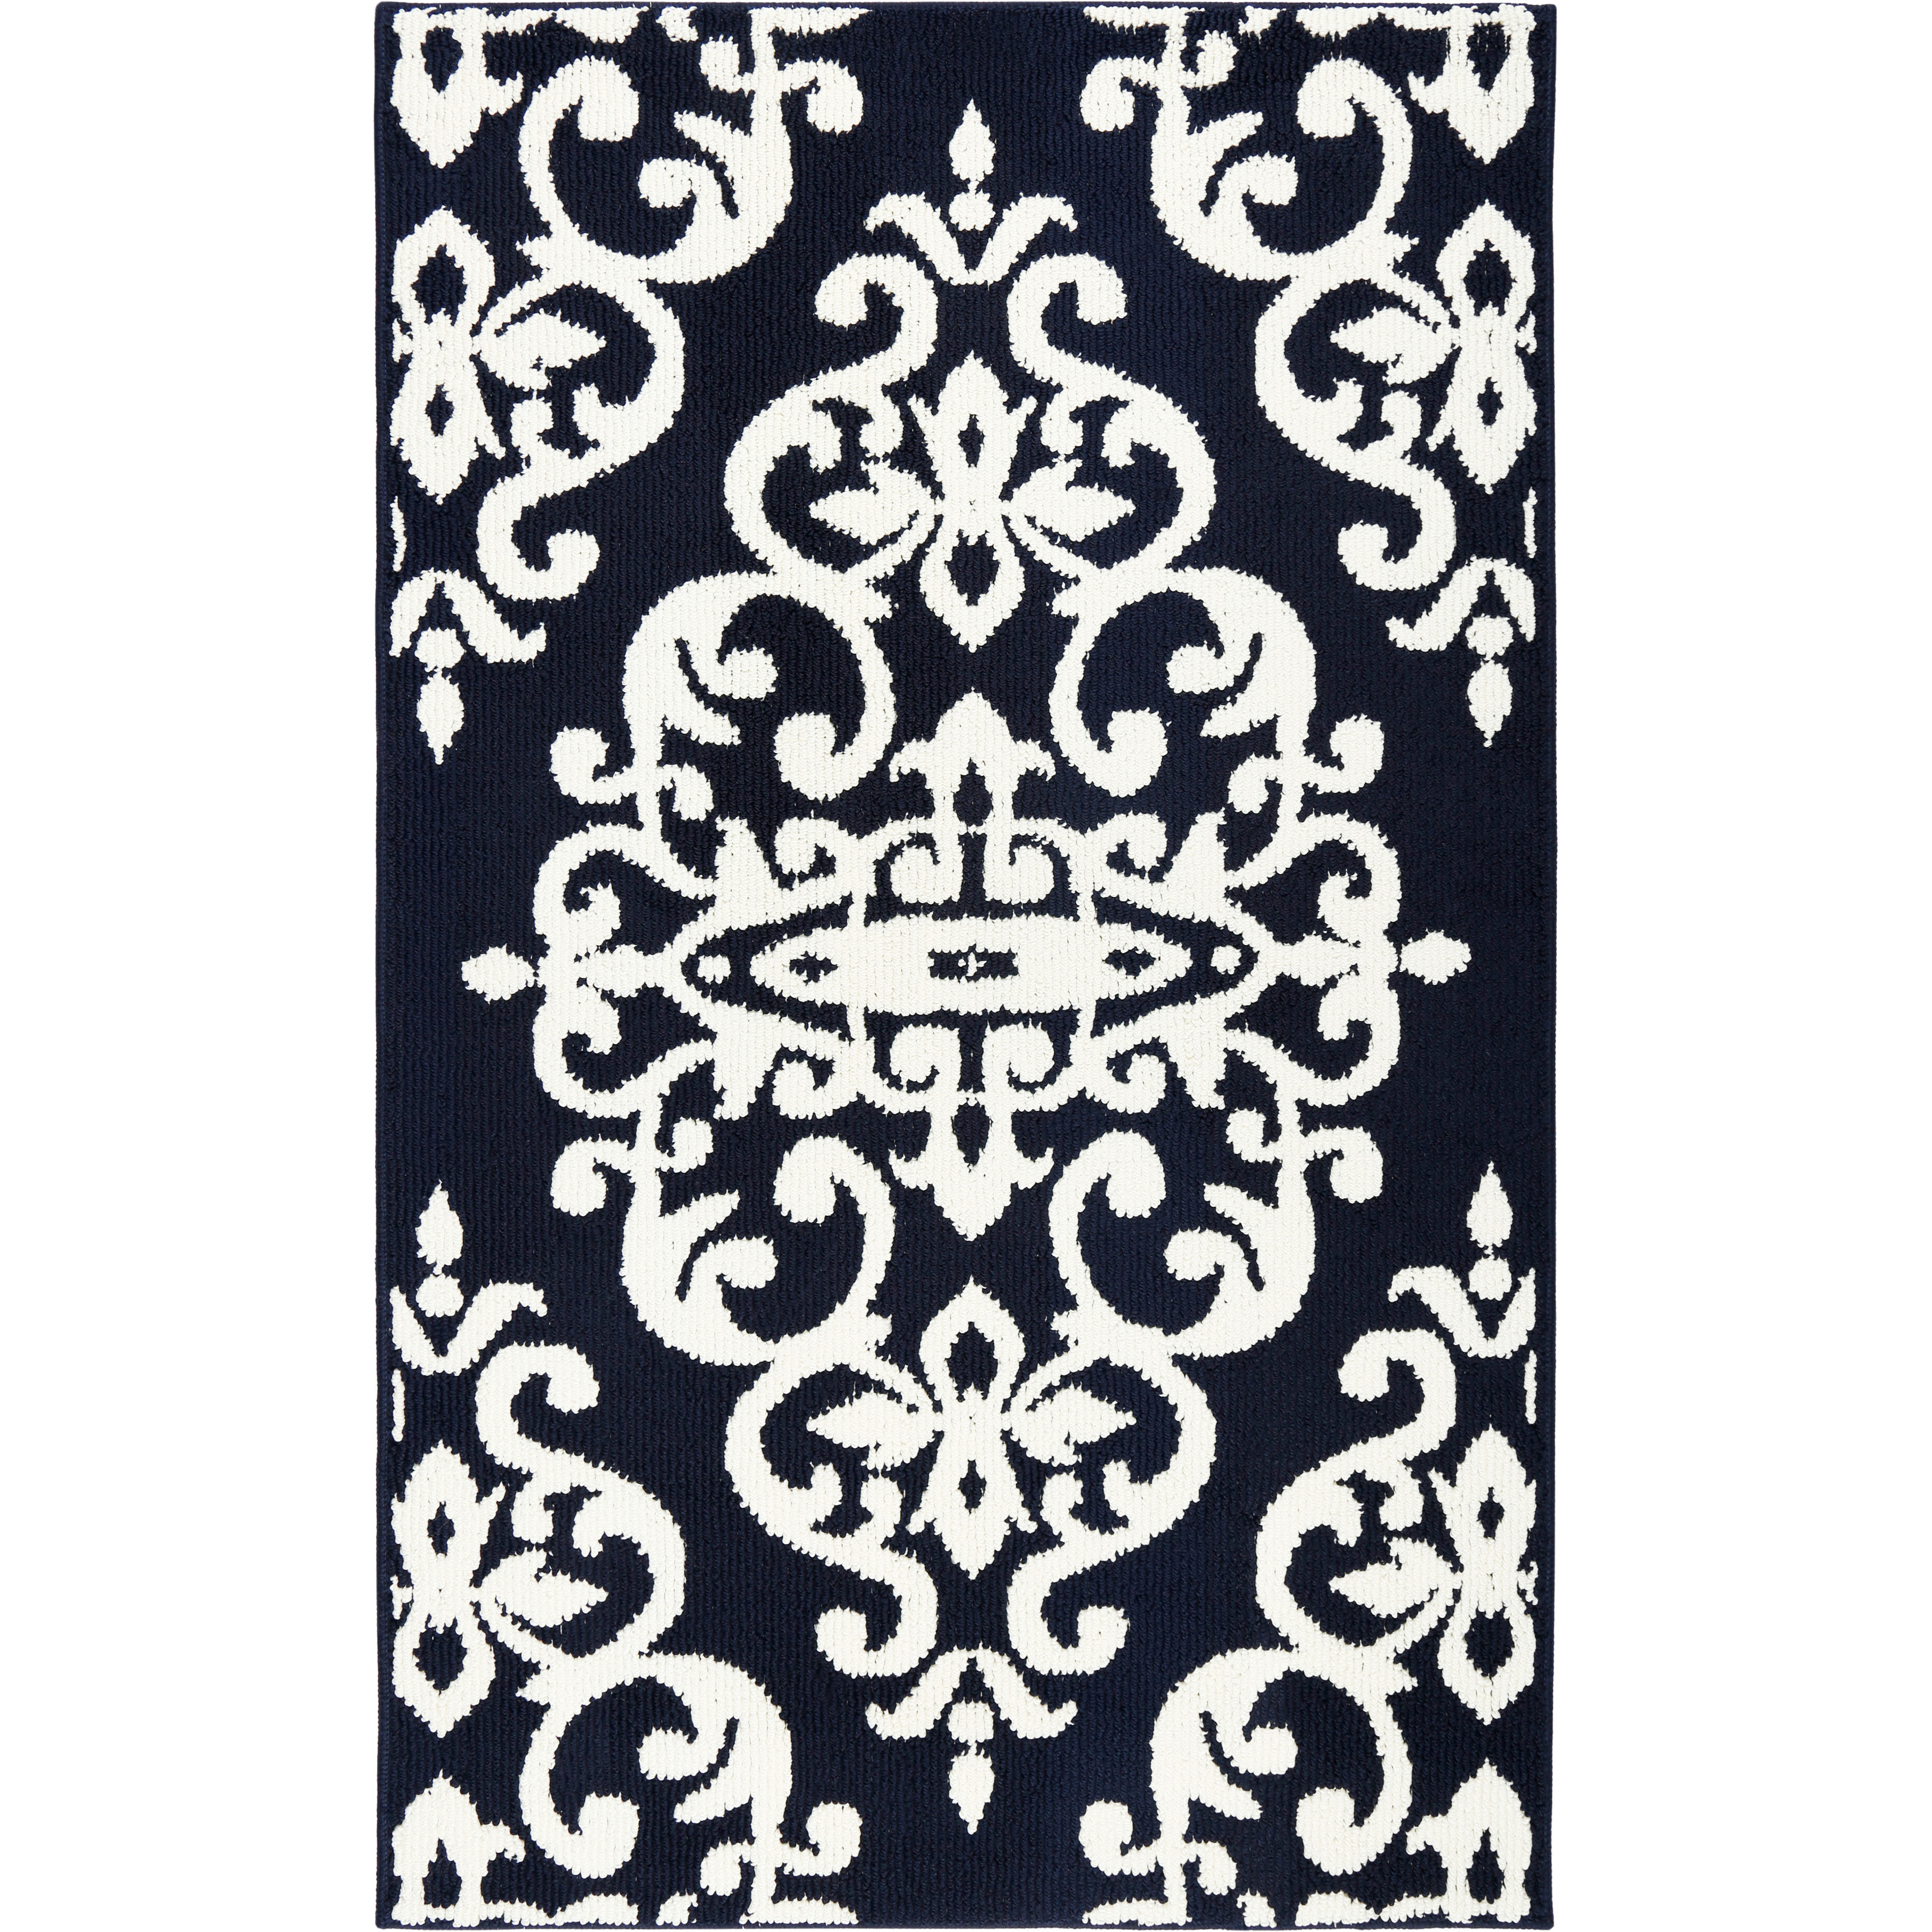 Home Dynamix Oxford Huron Damask Area Rug, Cream/Gray, 5'2"x7'2" - image 1 of 4